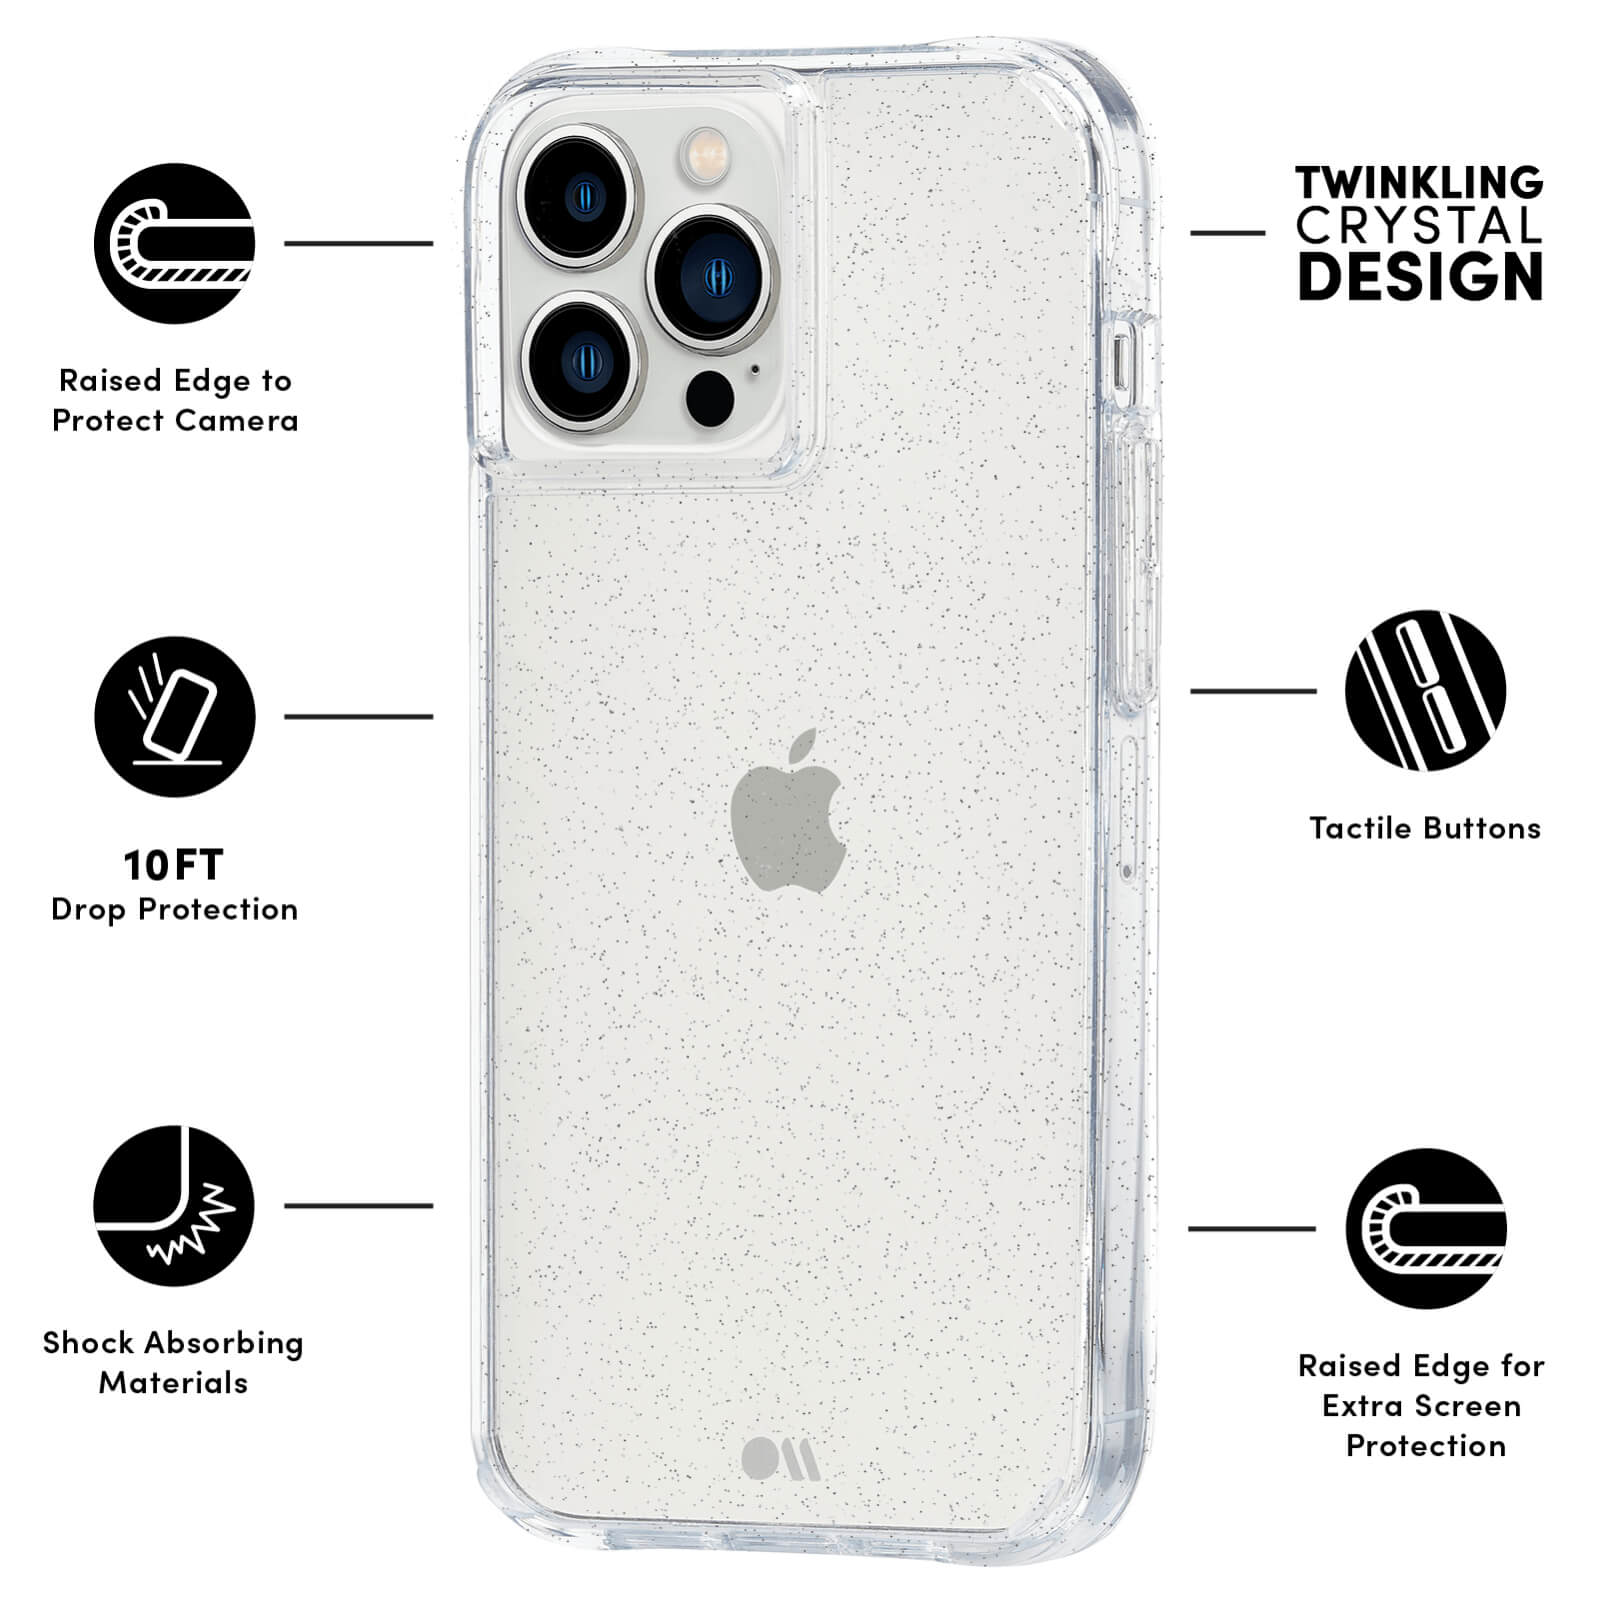 Features: raised edge to protect camera, 10 ft drop protection, shock absorbing materials, twinkling crystal design, tactile buttons, raised edge for extra screen protection. color::Clear